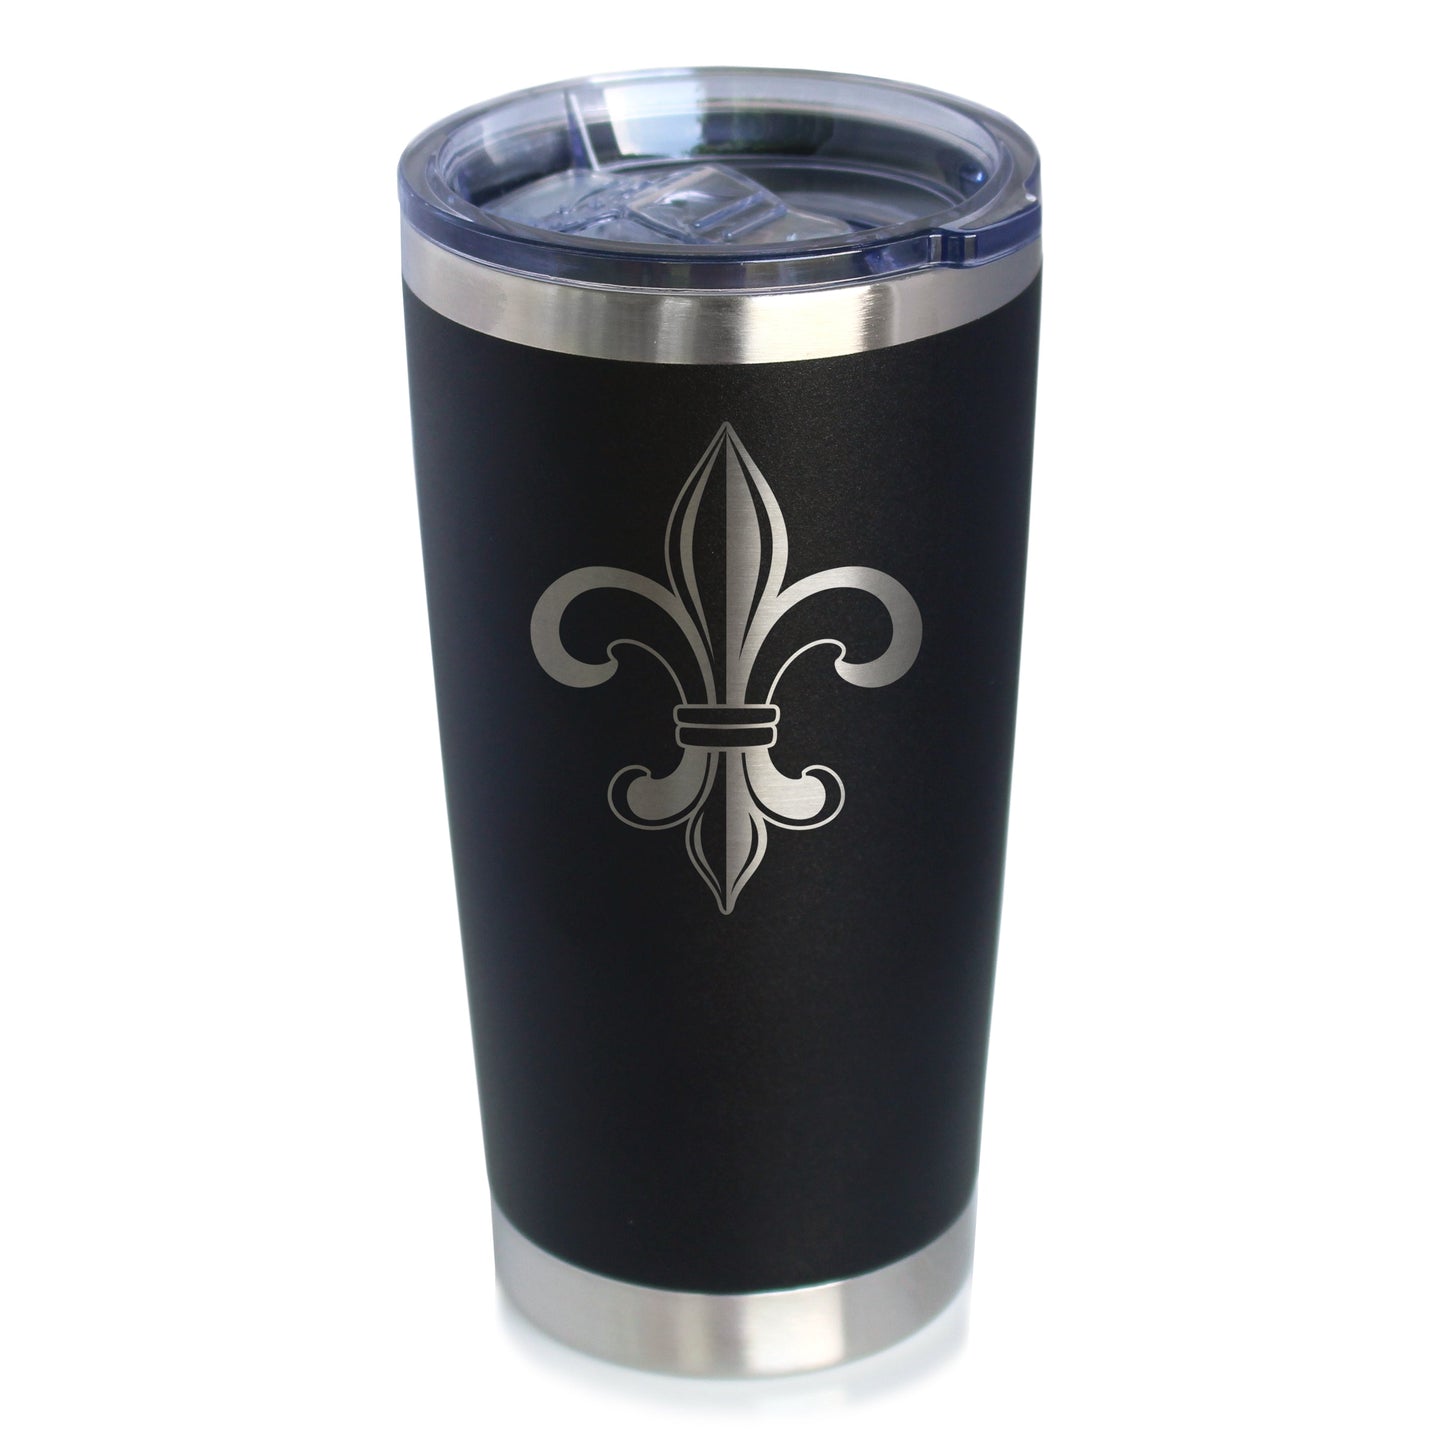 Fleur de Lis - Cute Lily Themed Gifts - Gift for Lovers of French & Italian Culture - 20 oz Coffee Tumbler